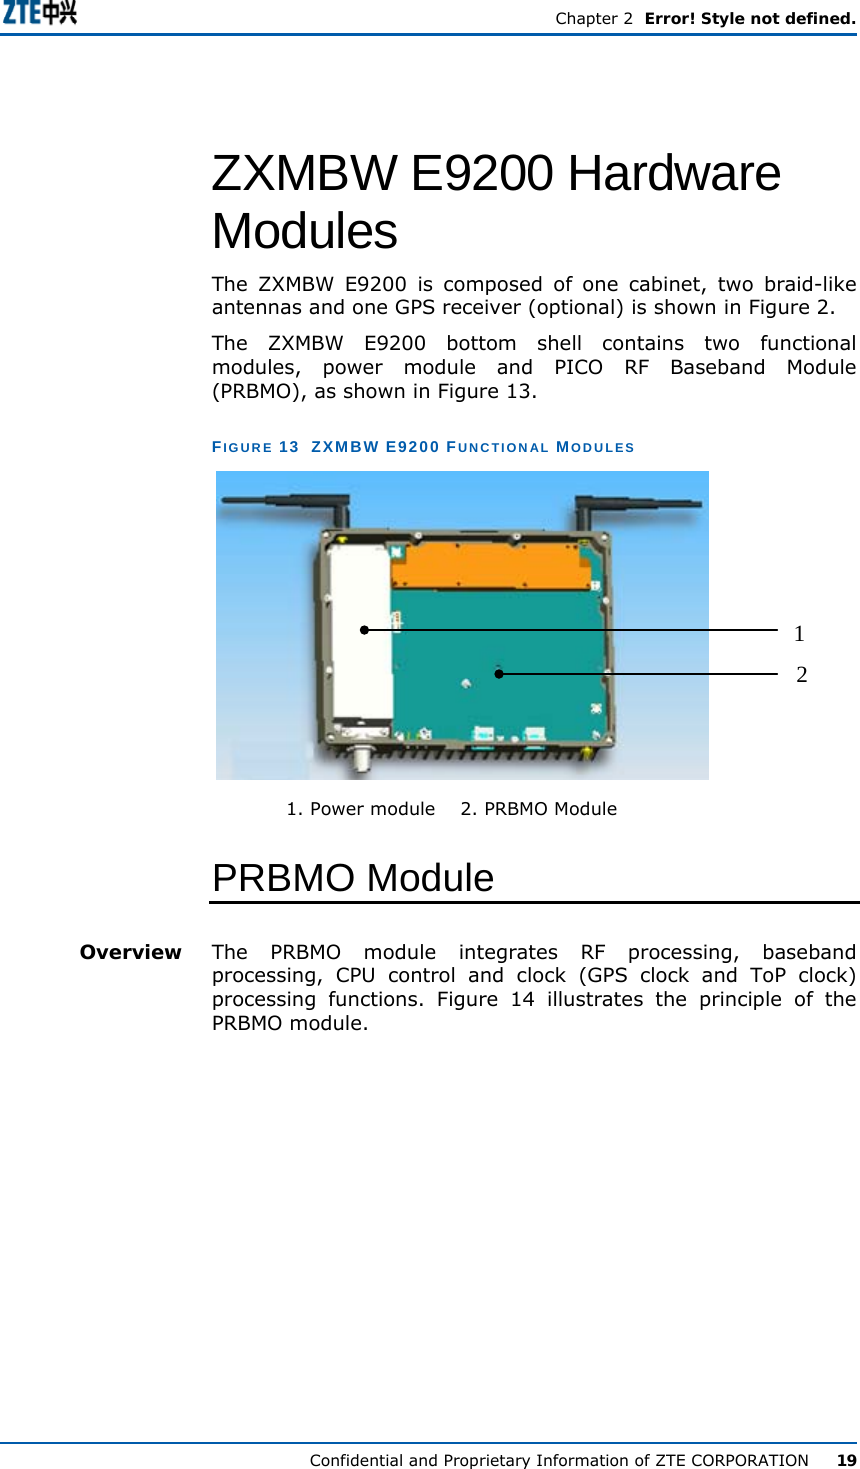  Chapter 2  Error! Style not defined. Confidential and Proprietary Information of ZTE CORPORATION      19 ZXMBW E9200 Hardware Modules The ZXMBW E9200 is composed of one cabinet, two braid-like antennas and one GPS receiver (optional) is shown in Figure 2. The ZXMBW E9200 bottom shell contains two functional modules, power module and PICO RF Baseband Module (PRBMO), as shown in Figure 13. FIGURE 13  ZXMBW E9200 FUNCTIONAL MODULES 12             1. Power module    2. PRBMO Module PRBMO Module The PRBMO module integrates RF processing, baseband processing, CPU control and clock (GPS clock and ToP clock) processing functions. Figure 14 illustrates the principle of the PRBMO module. Overview 